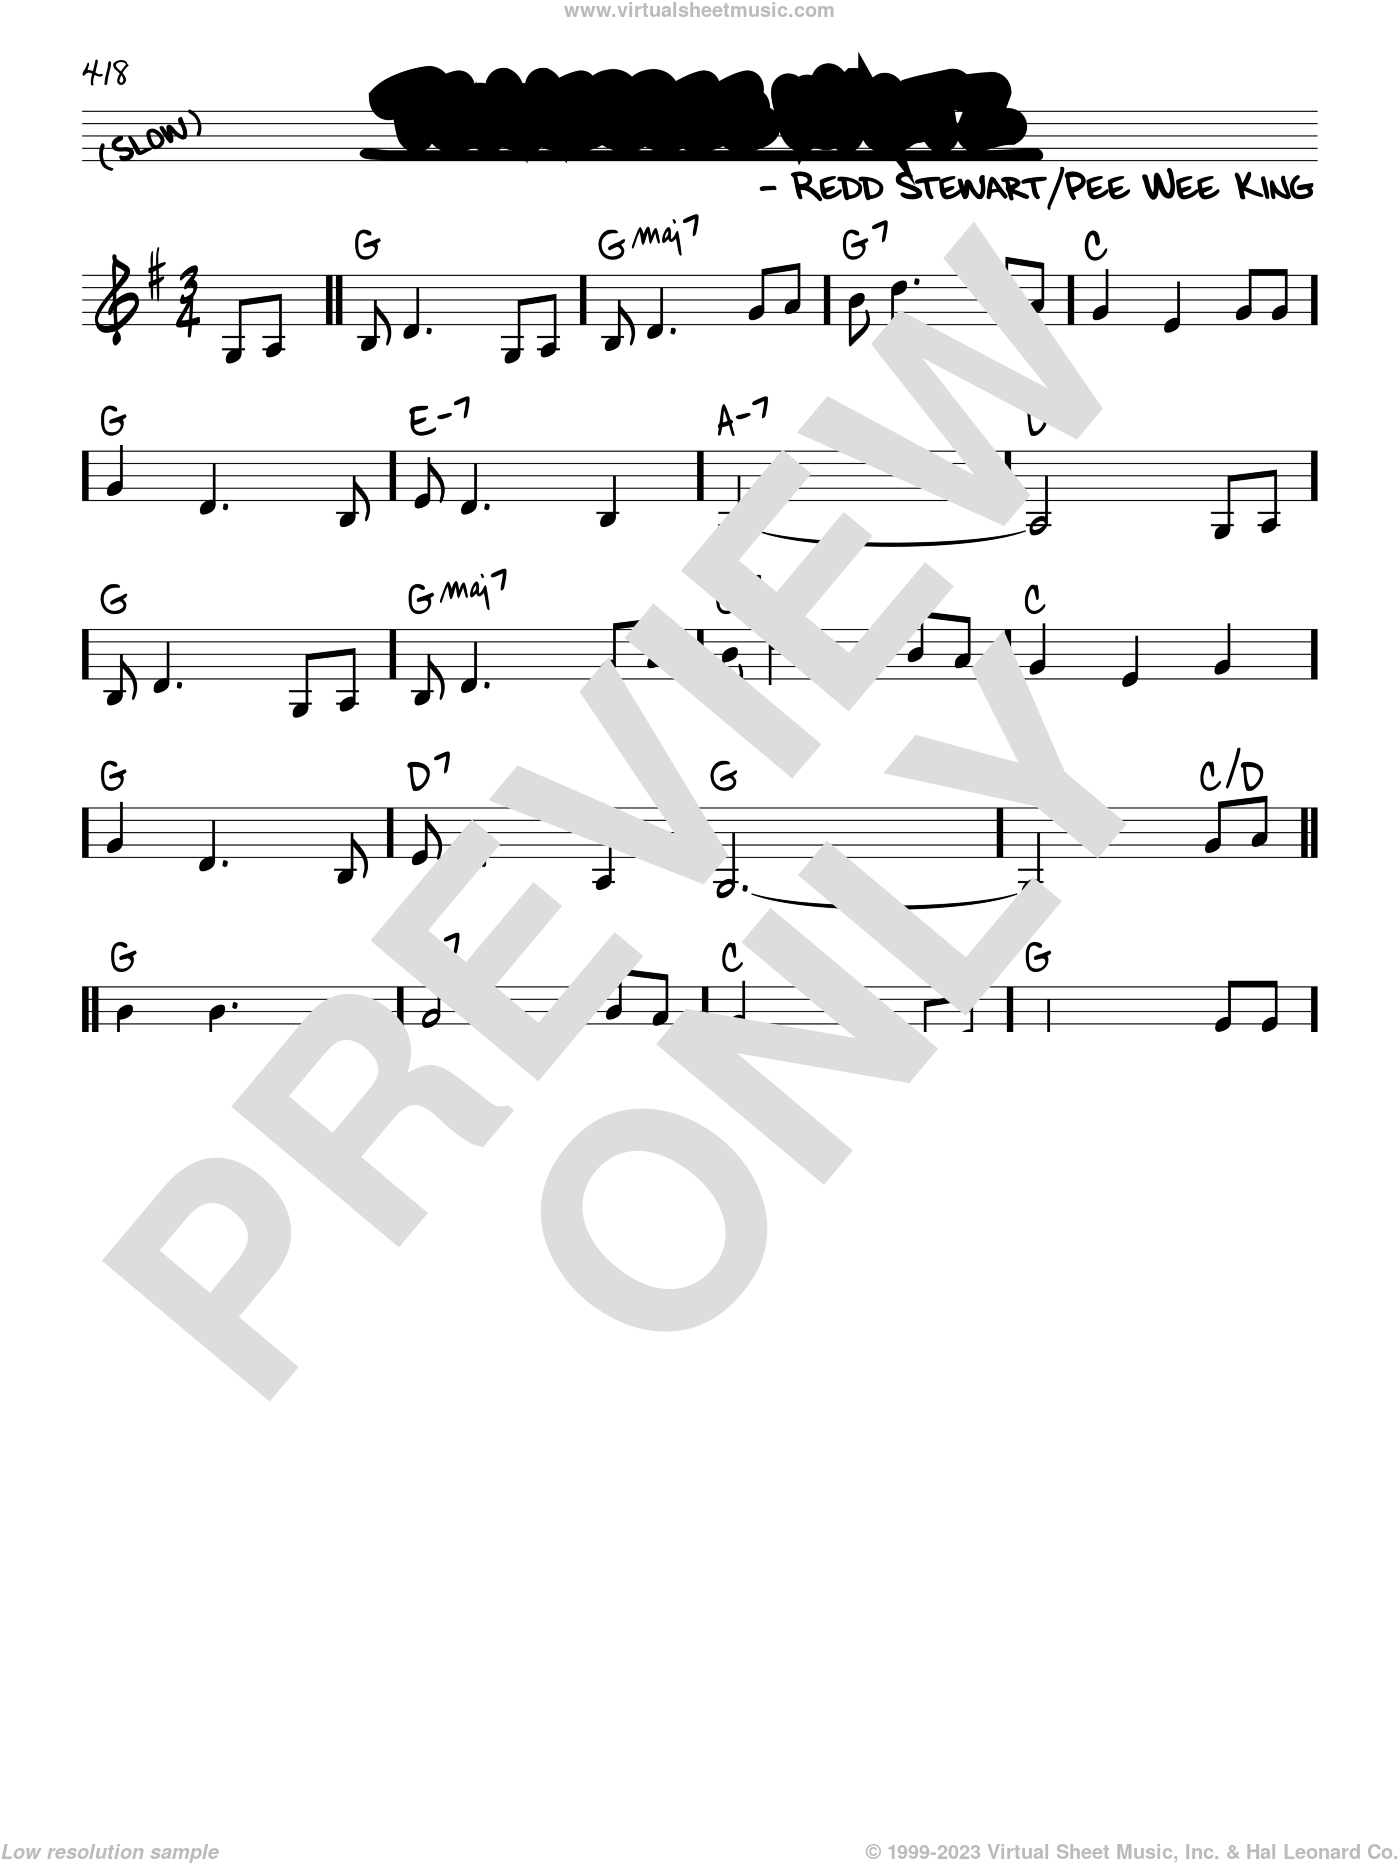 Waltz sheet music (real book melody and chords) book)